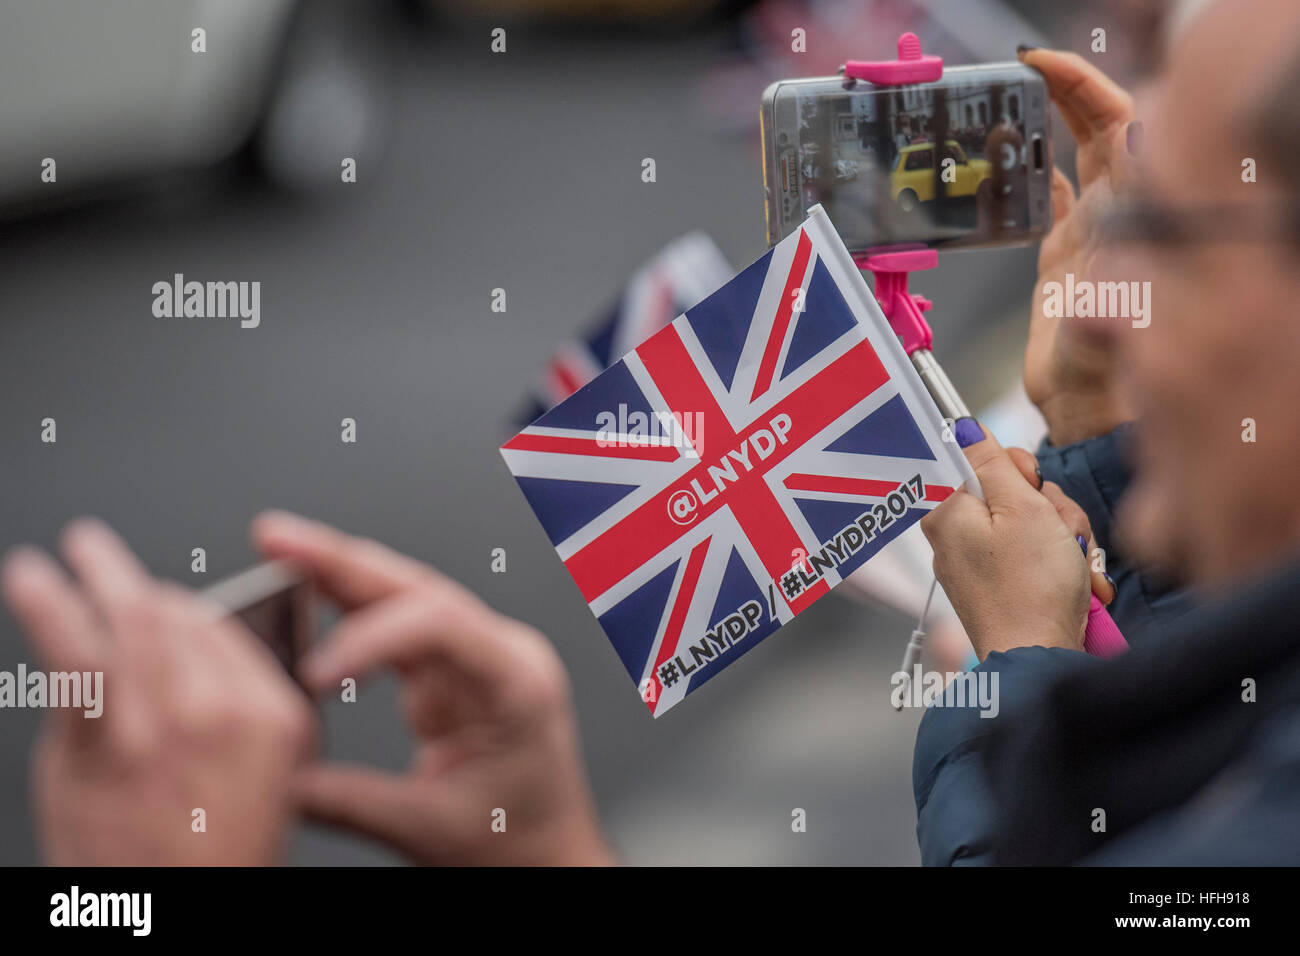 London, UK. 1st Jan, 2017. The vintage minis - The New Years day parade passes through central London form Piccadilly to Whitehall. London 01 Jan 2017 © Guy Bell/Alamy Live News Stock Photo